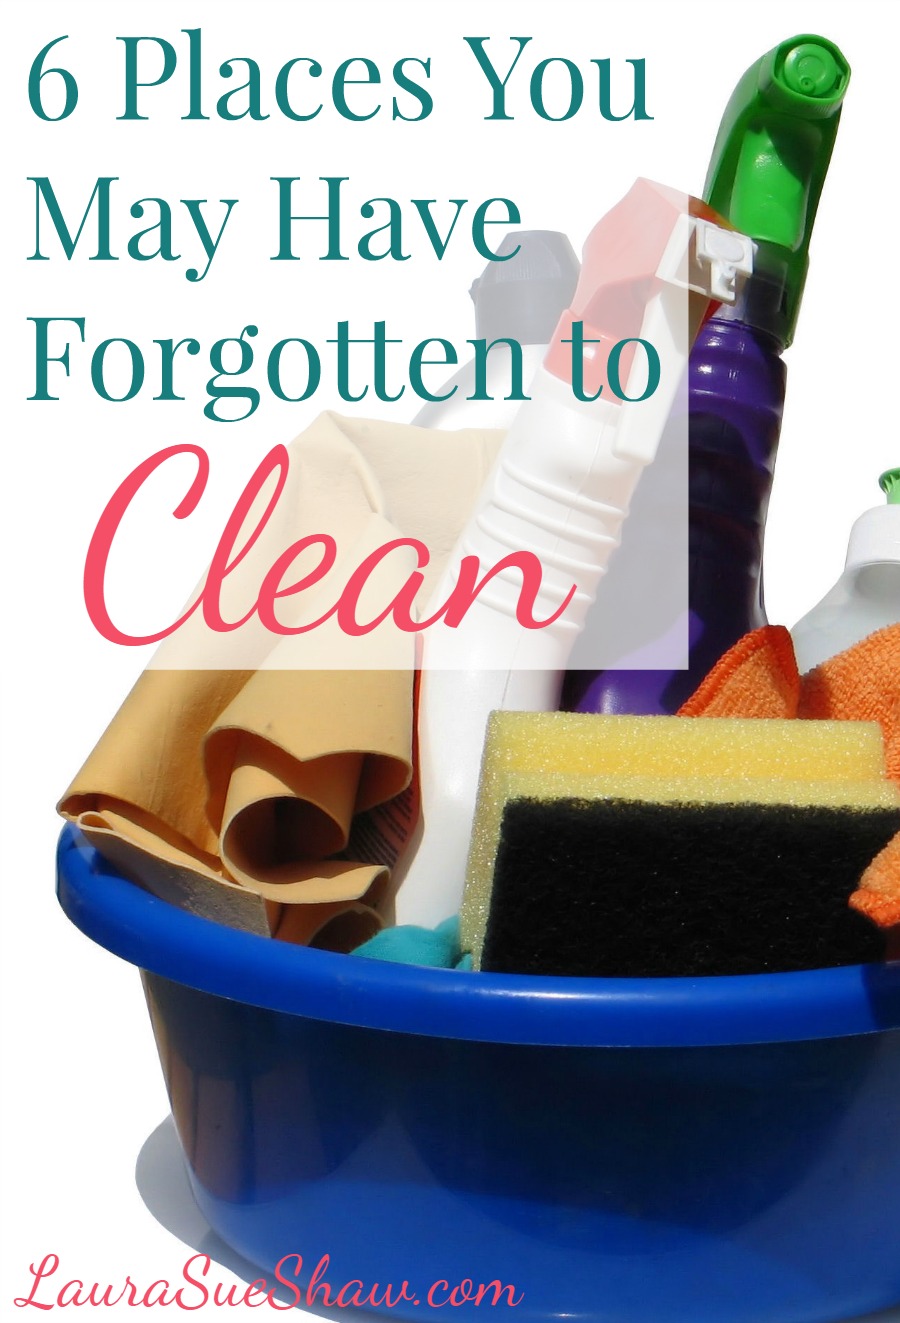 6 Places You Might Have Forgotten to Clean